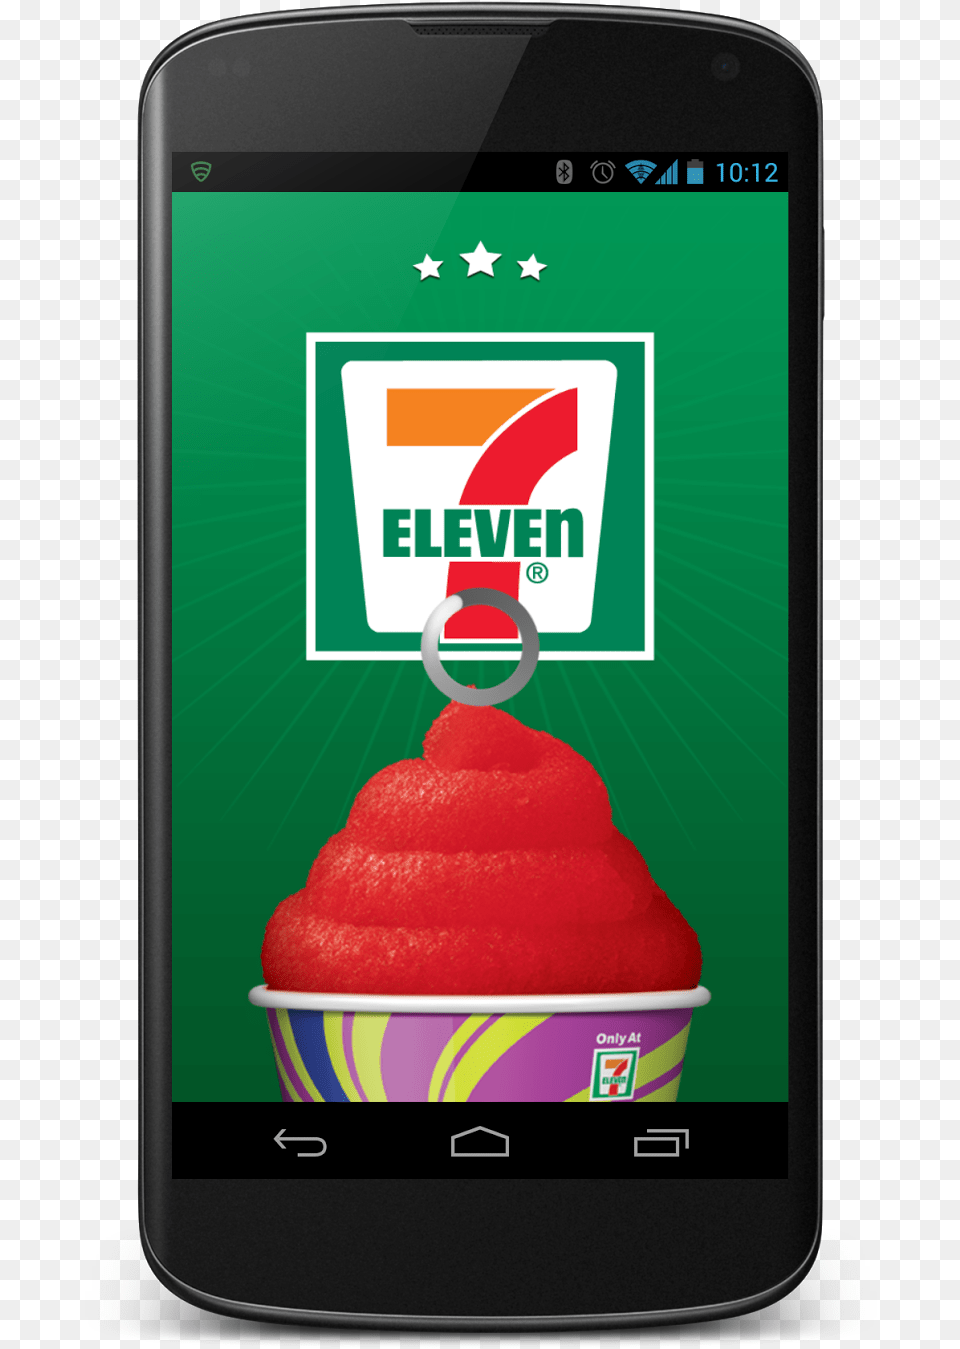 Download The 7 Eleven Mobile App To Get Your Freebies 7 Eleven Mobile Ad, Electronics, Mobile Phone, Phone, Cream Free Png